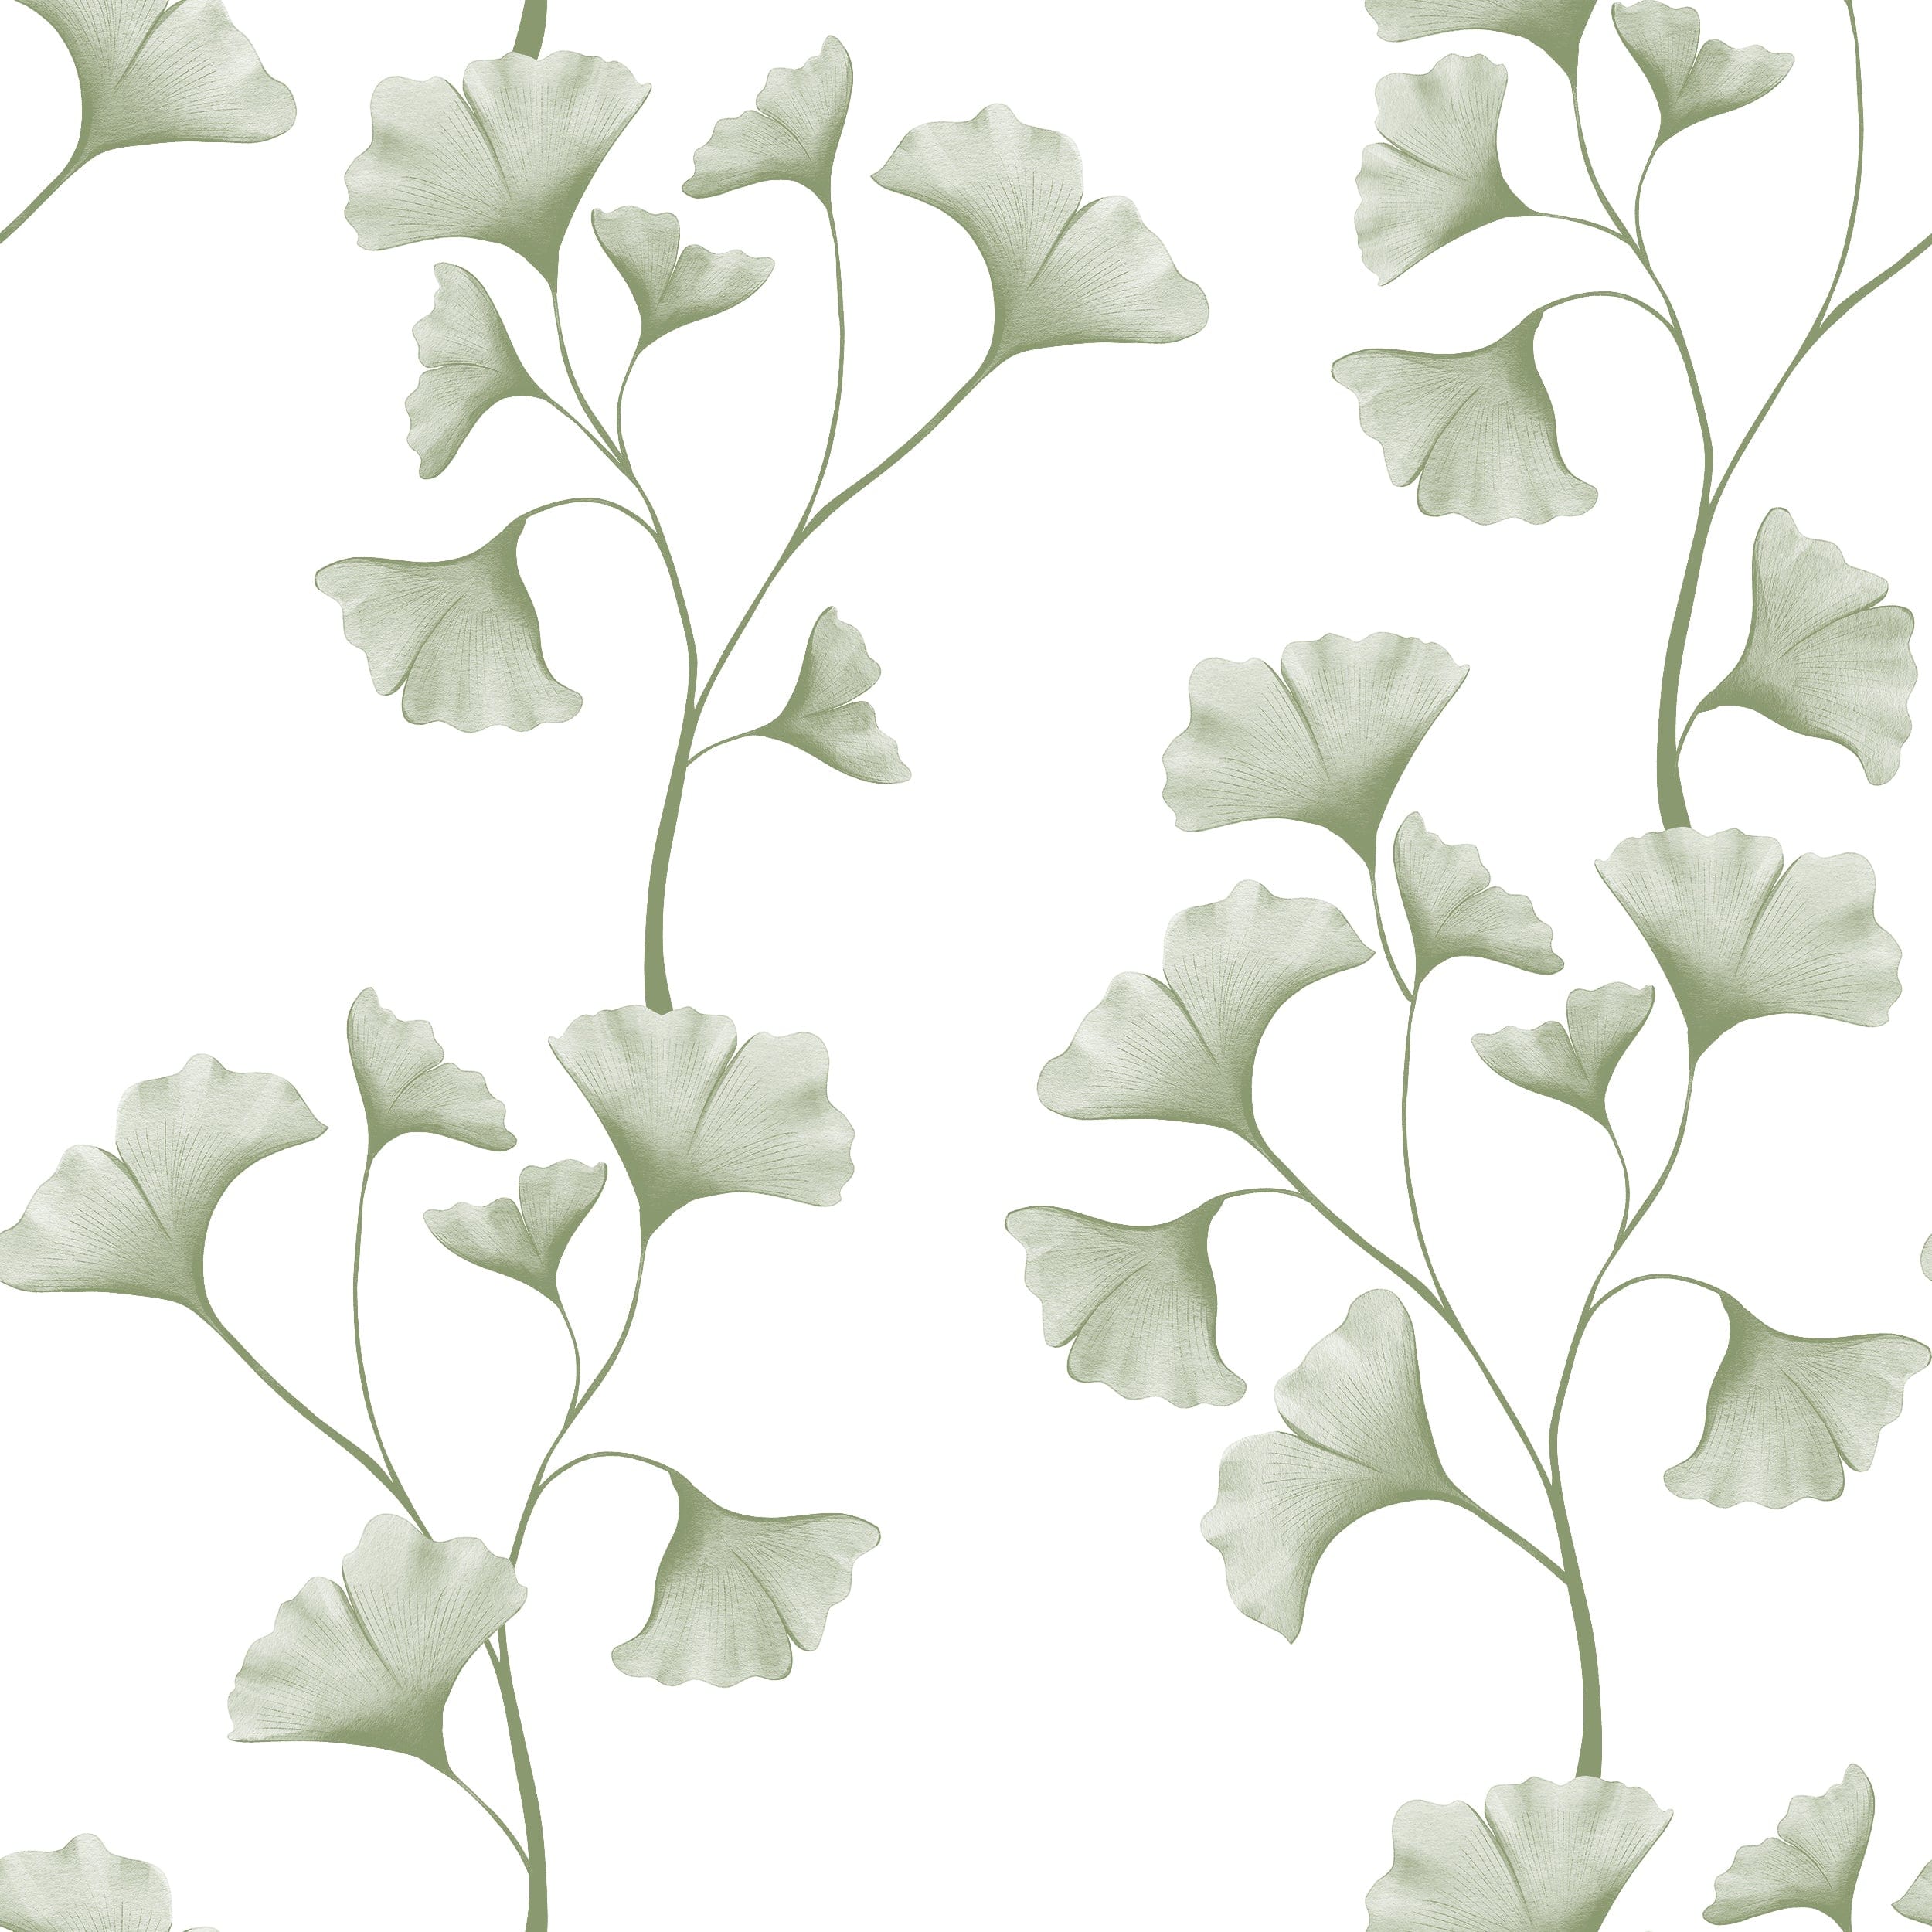 A close-up view of the Botanical Vines Wallpaper - 75", featuring a delicate pattern of stylized green ginkgo leaves on a soft white background. The leaves are spaced along thin, wavy vines, creating a gentle, flowing aesthetic that invokes a sense of calm and elegance.